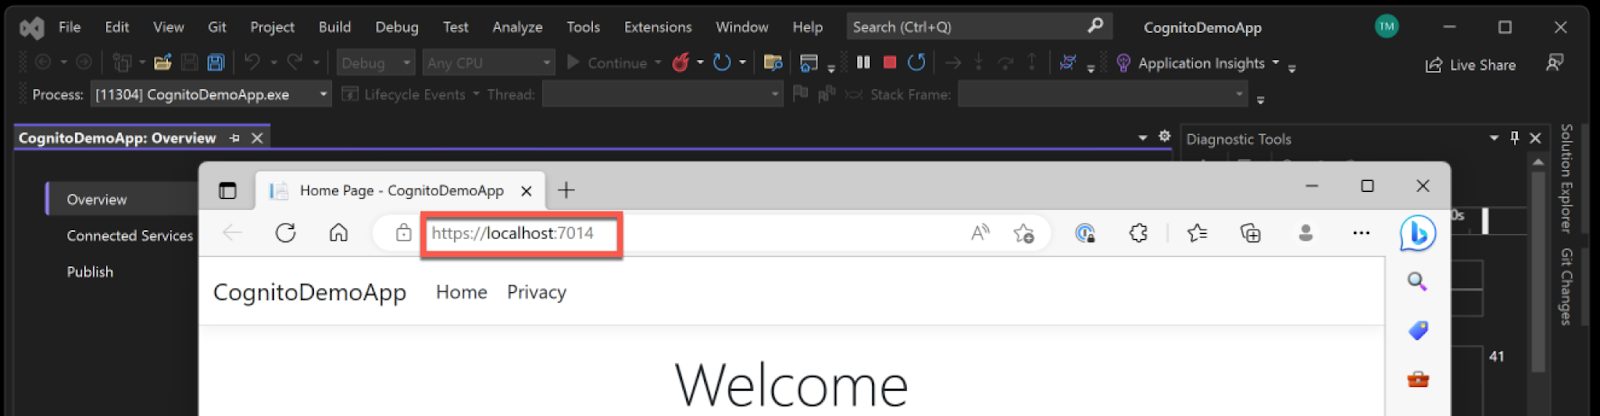 Visual Studio running an ASP.NET Core application side by side a web browser at URL https://localhost:7014